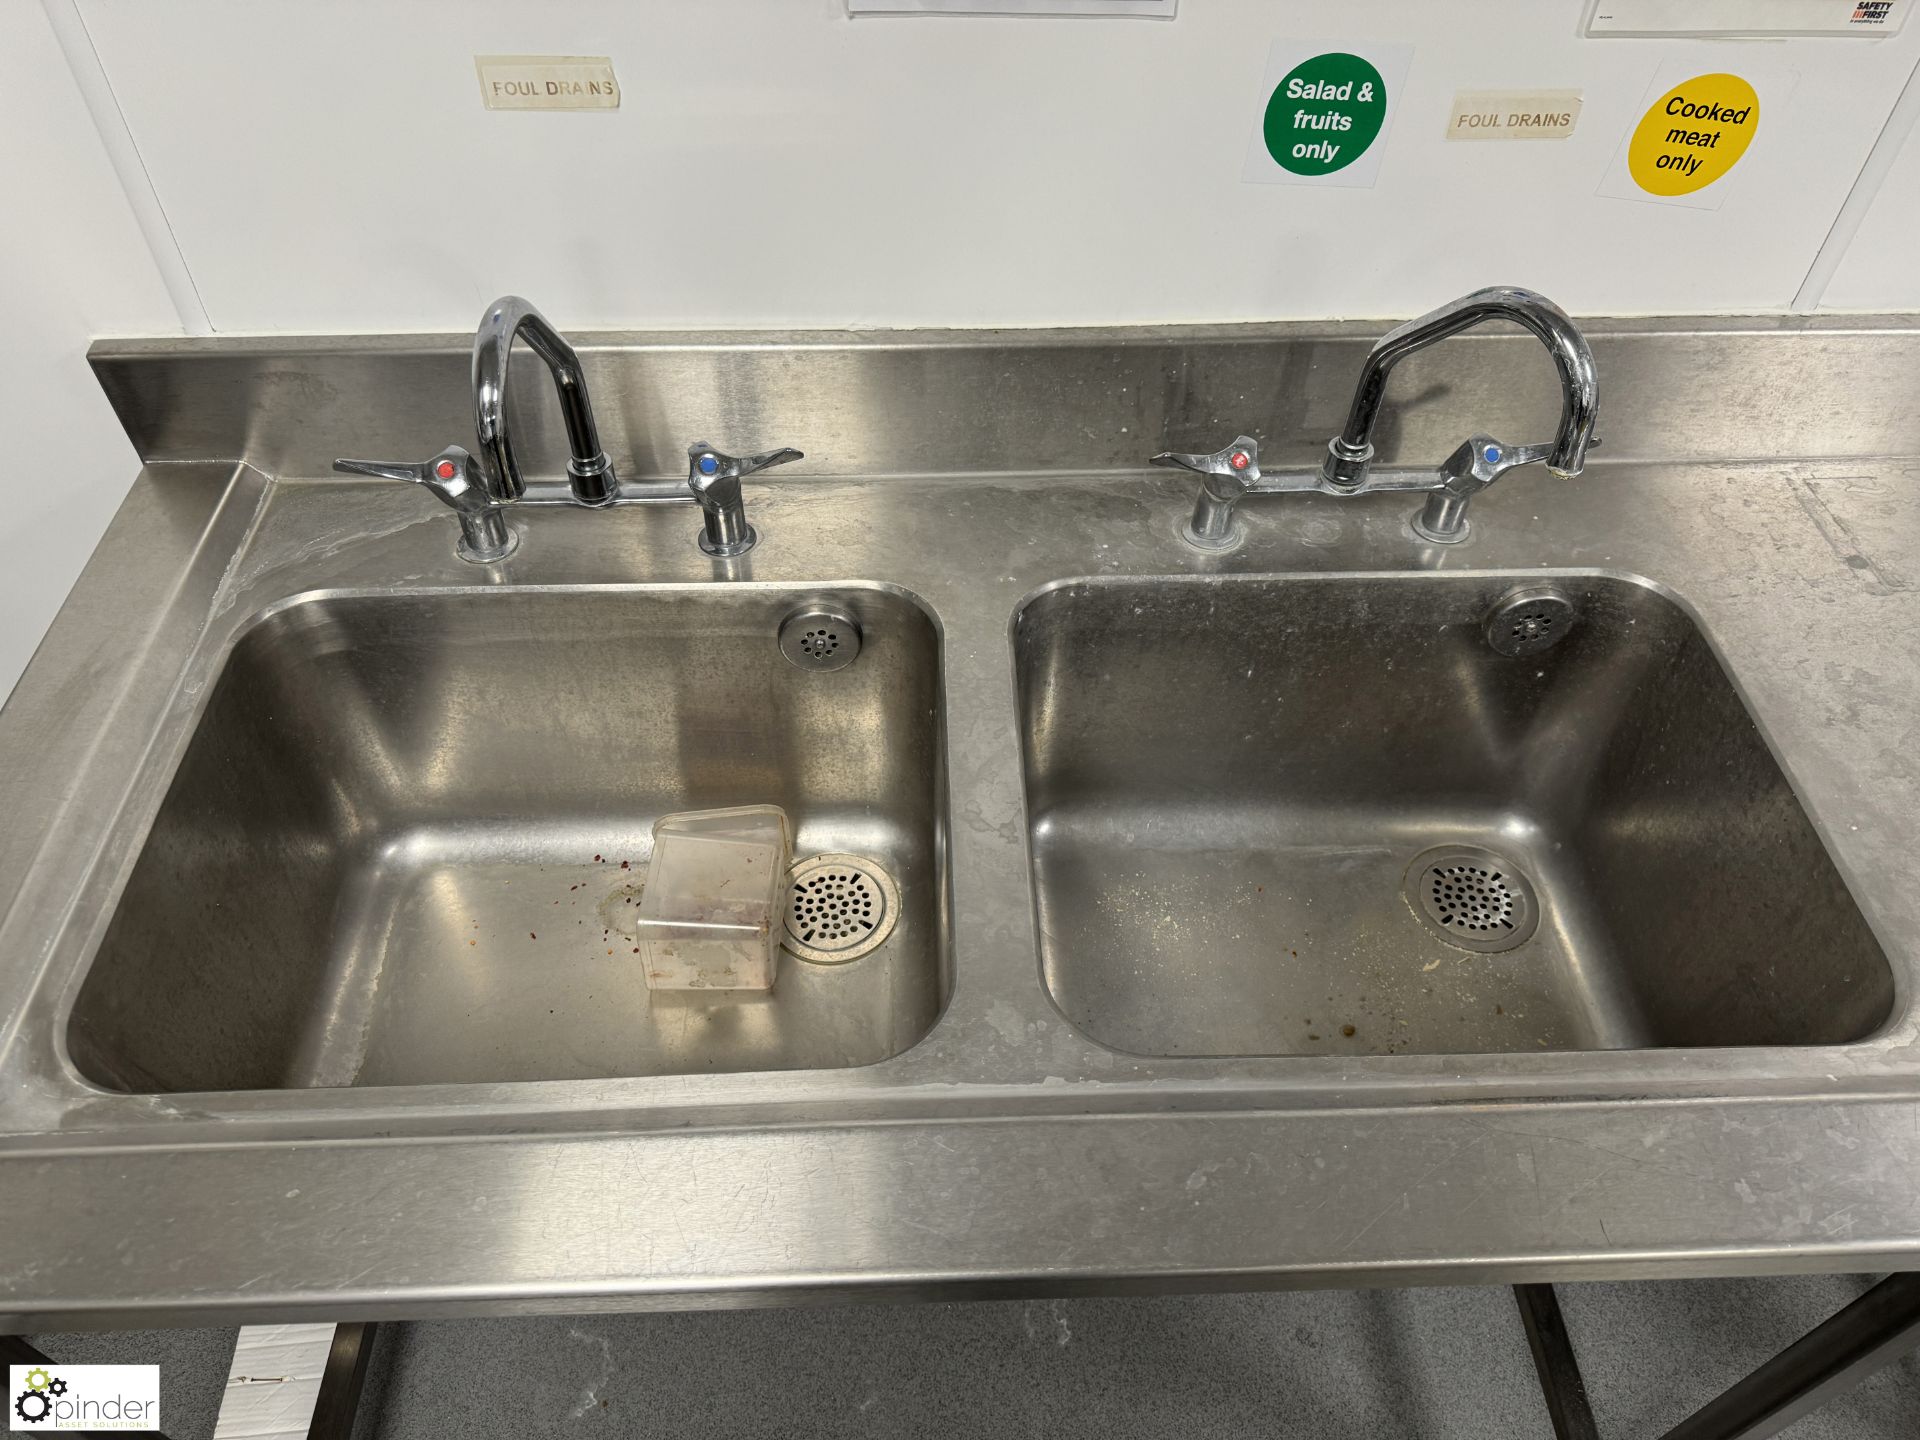 Stainless steel twin bowl Sink, 1800mm x 700mm x 900mm (location in building – basement kitchen 2) - Image 3 of 4